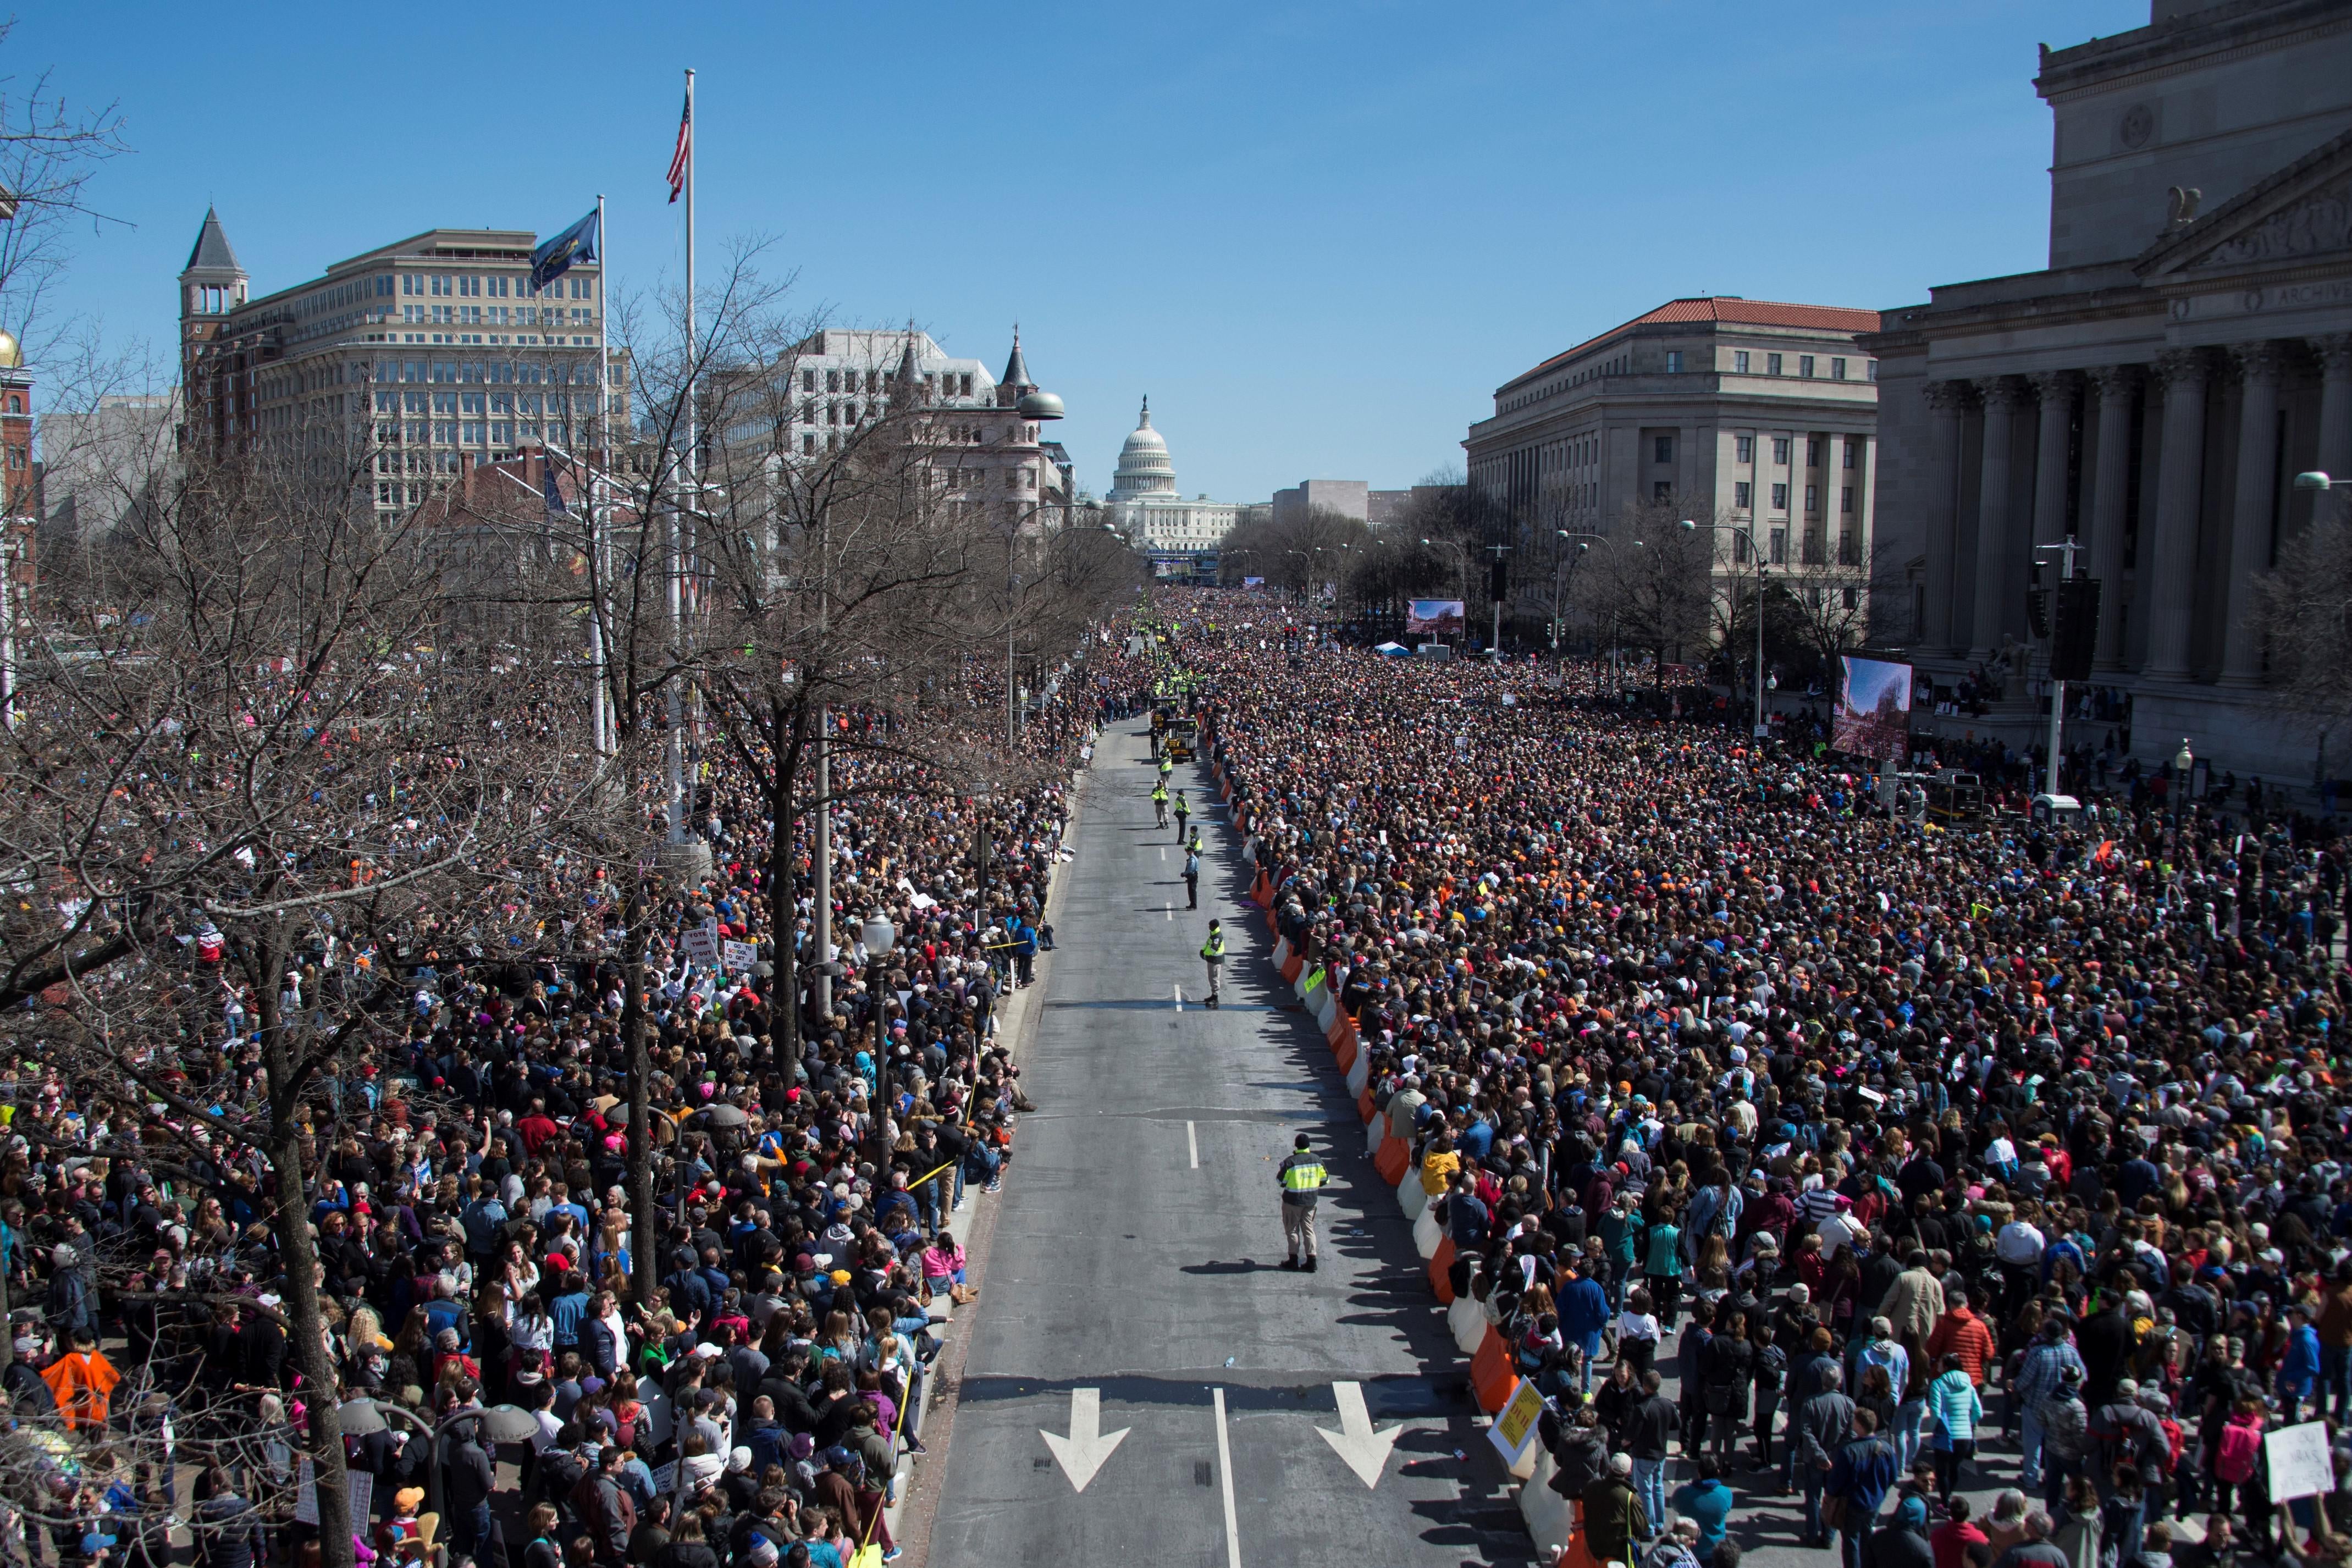 Thousands of people gather on Pennsylvania Avenue during the March For Our Lives rally against gun violence in Washington, D.C. on March 24, 2018. 